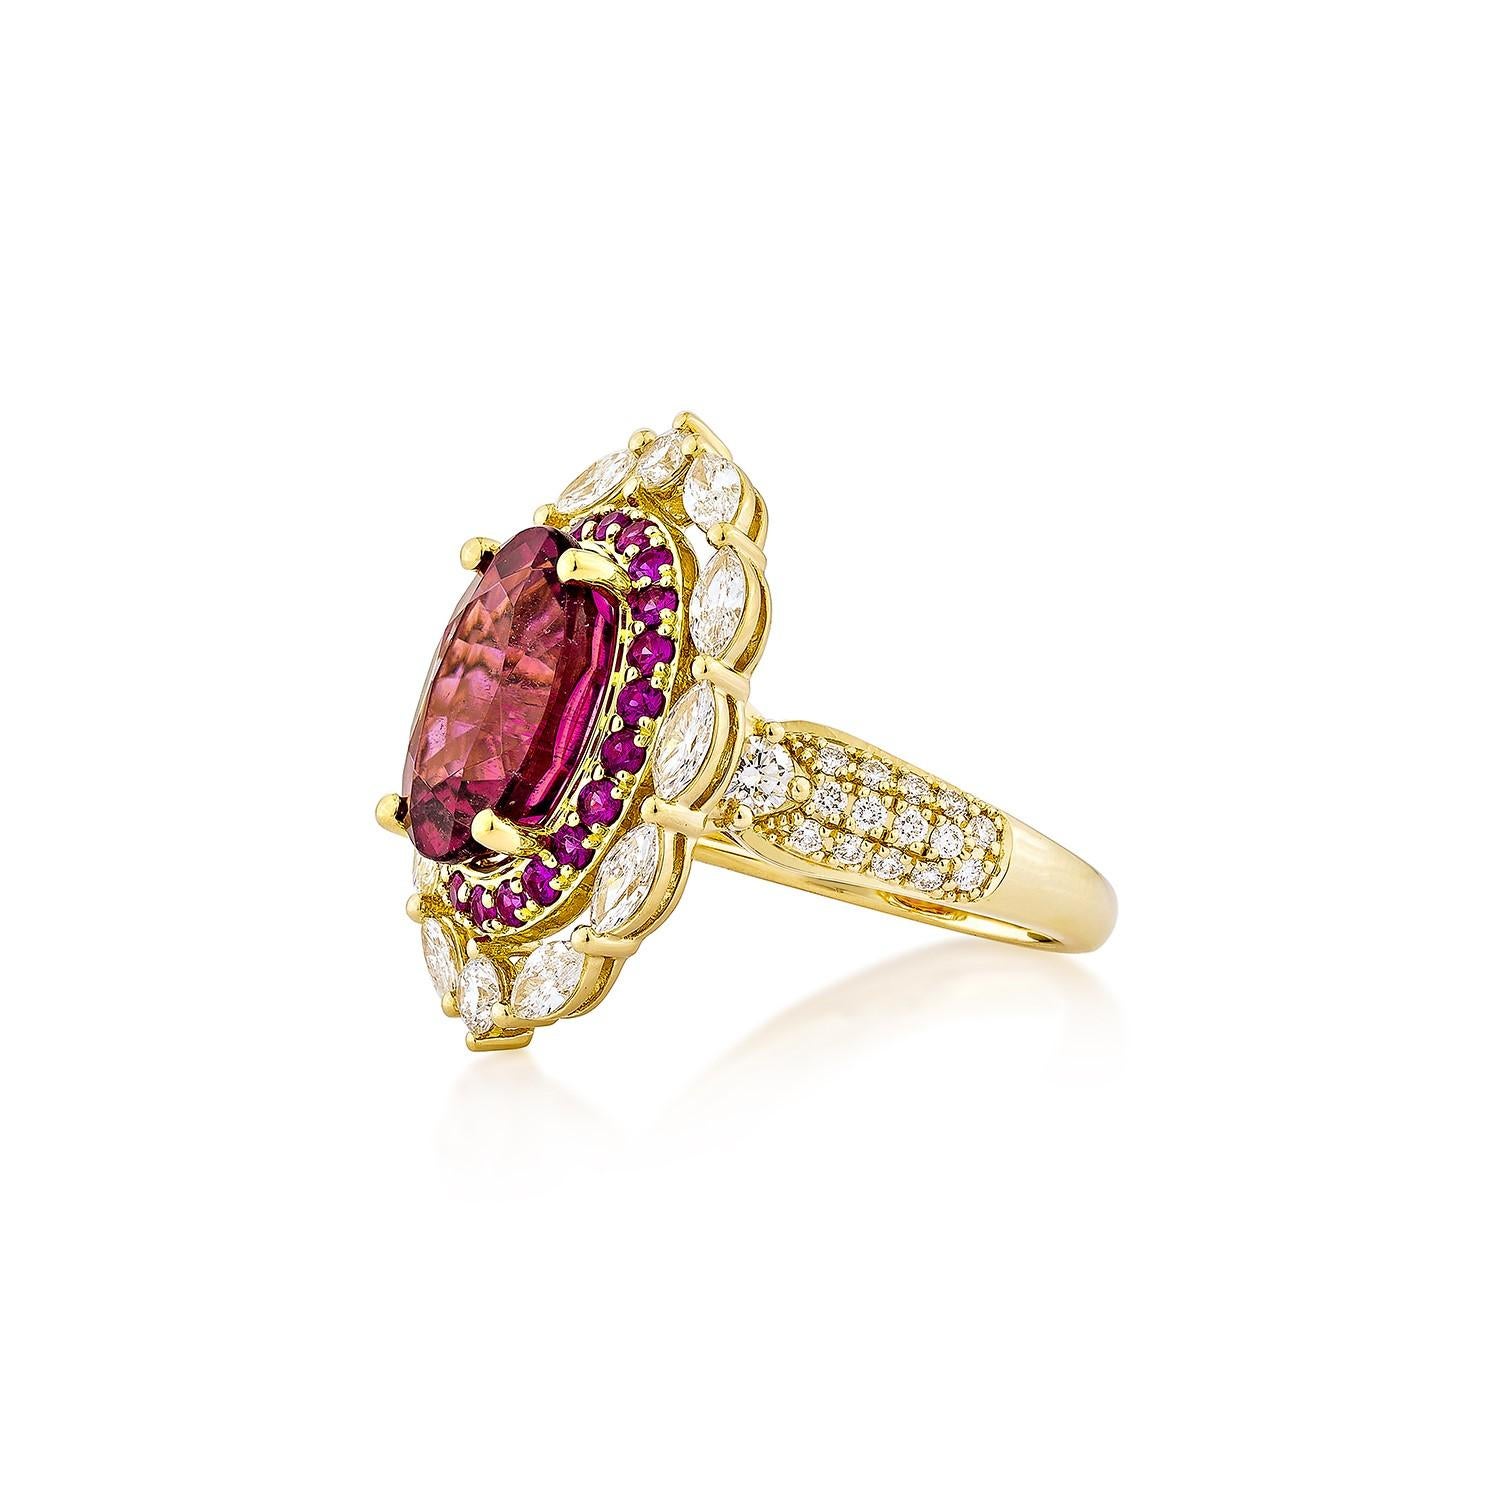 Oval Cut 5.70 Carat Rubellite Cocktail Ring in 18Karat Yellow Gold with Ruby and Diamond. For Sale